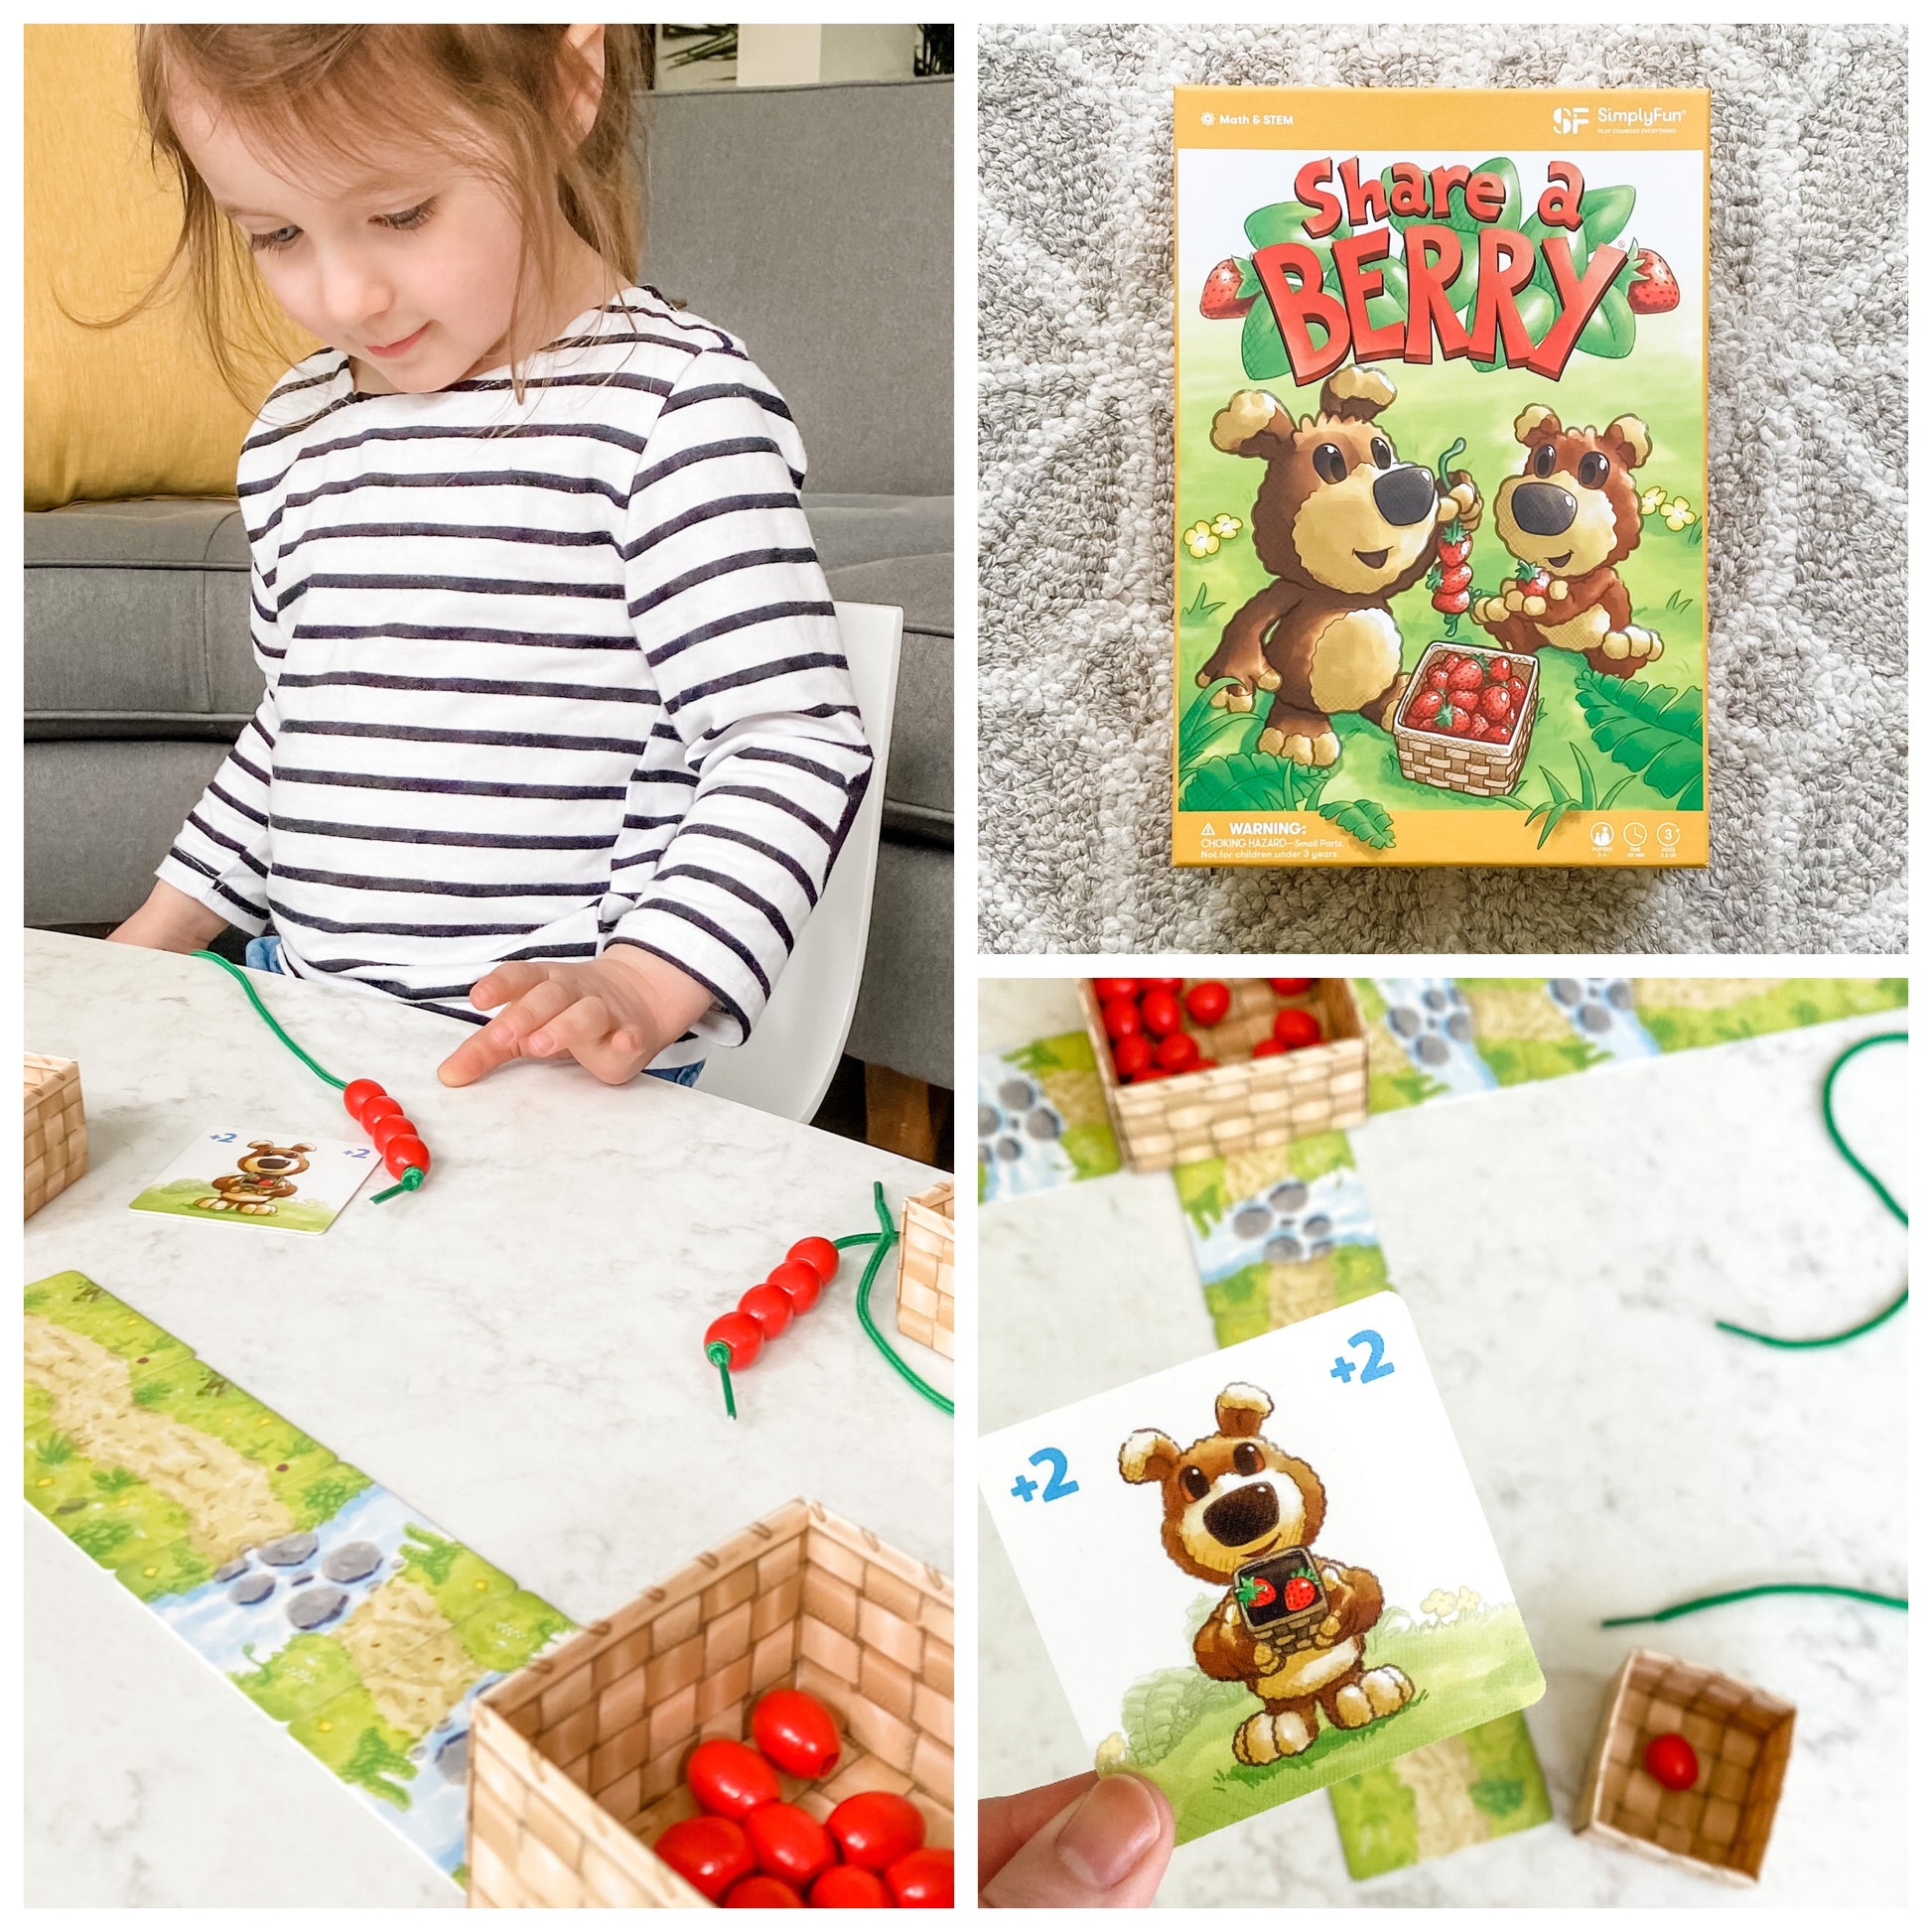 Share a Berry: Preschool Counting & Sharing Game